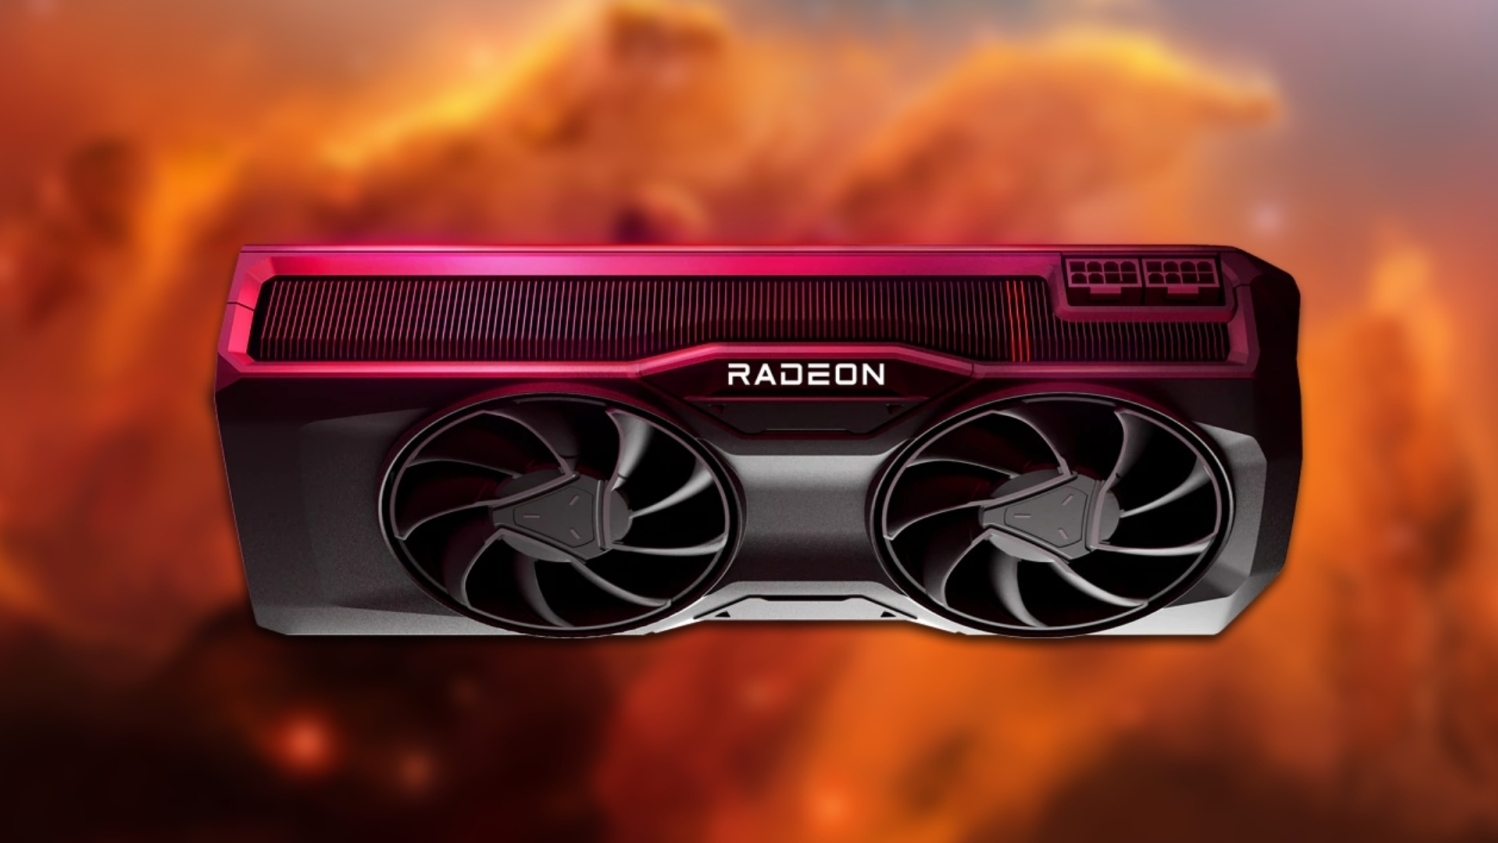 AMD fills the gap and also releases the unicorn: Radeon RX 7800XT